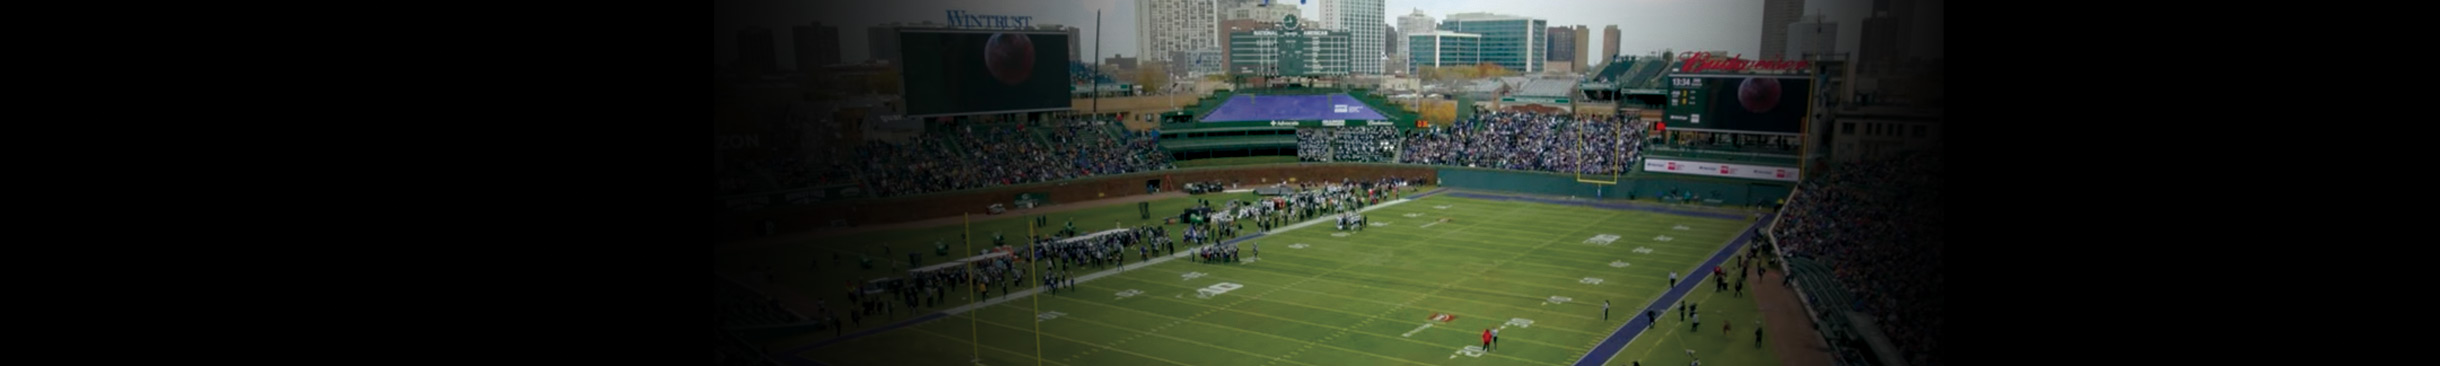 How It's Done: Converting a Baseball Field to Football - Grainger KnowHow